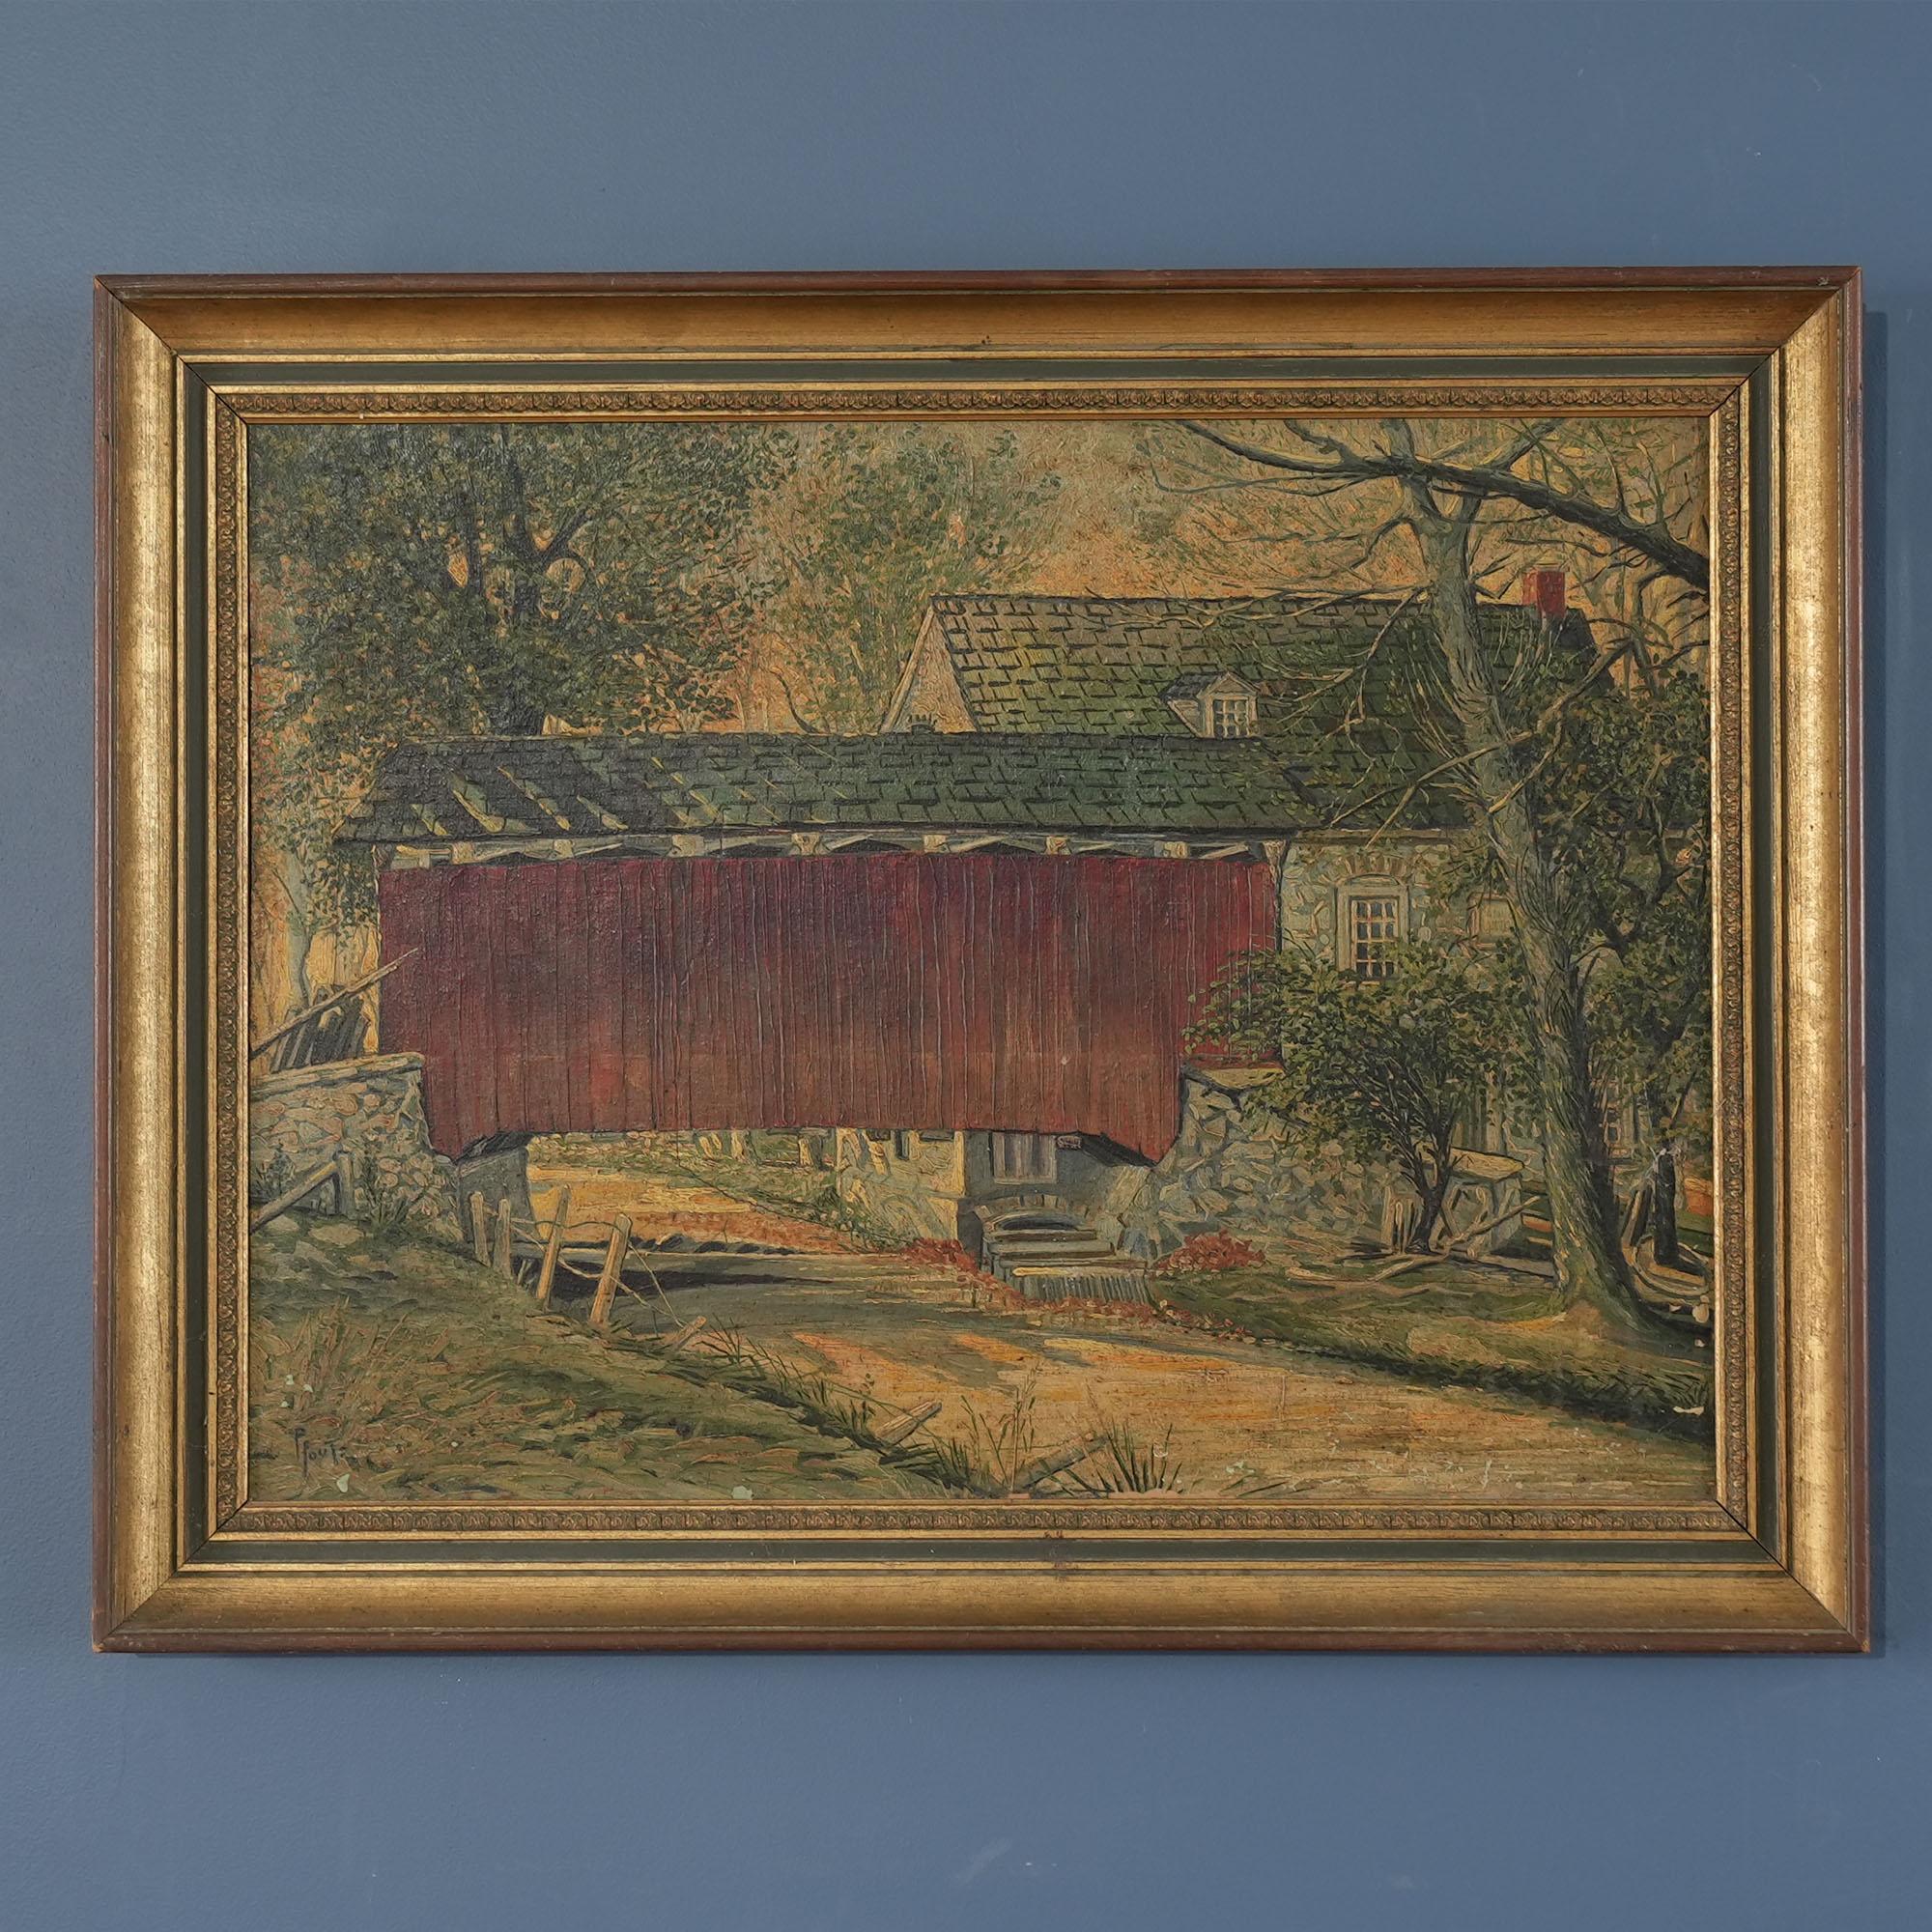 A very interesting and unusual Lancaster Covered Bridge Original Oil Painting by artist J. Earle Pfoutz. The painting is produced on artist board and comes complete with what appears to be an original artist decorated/painted frame. The painting is